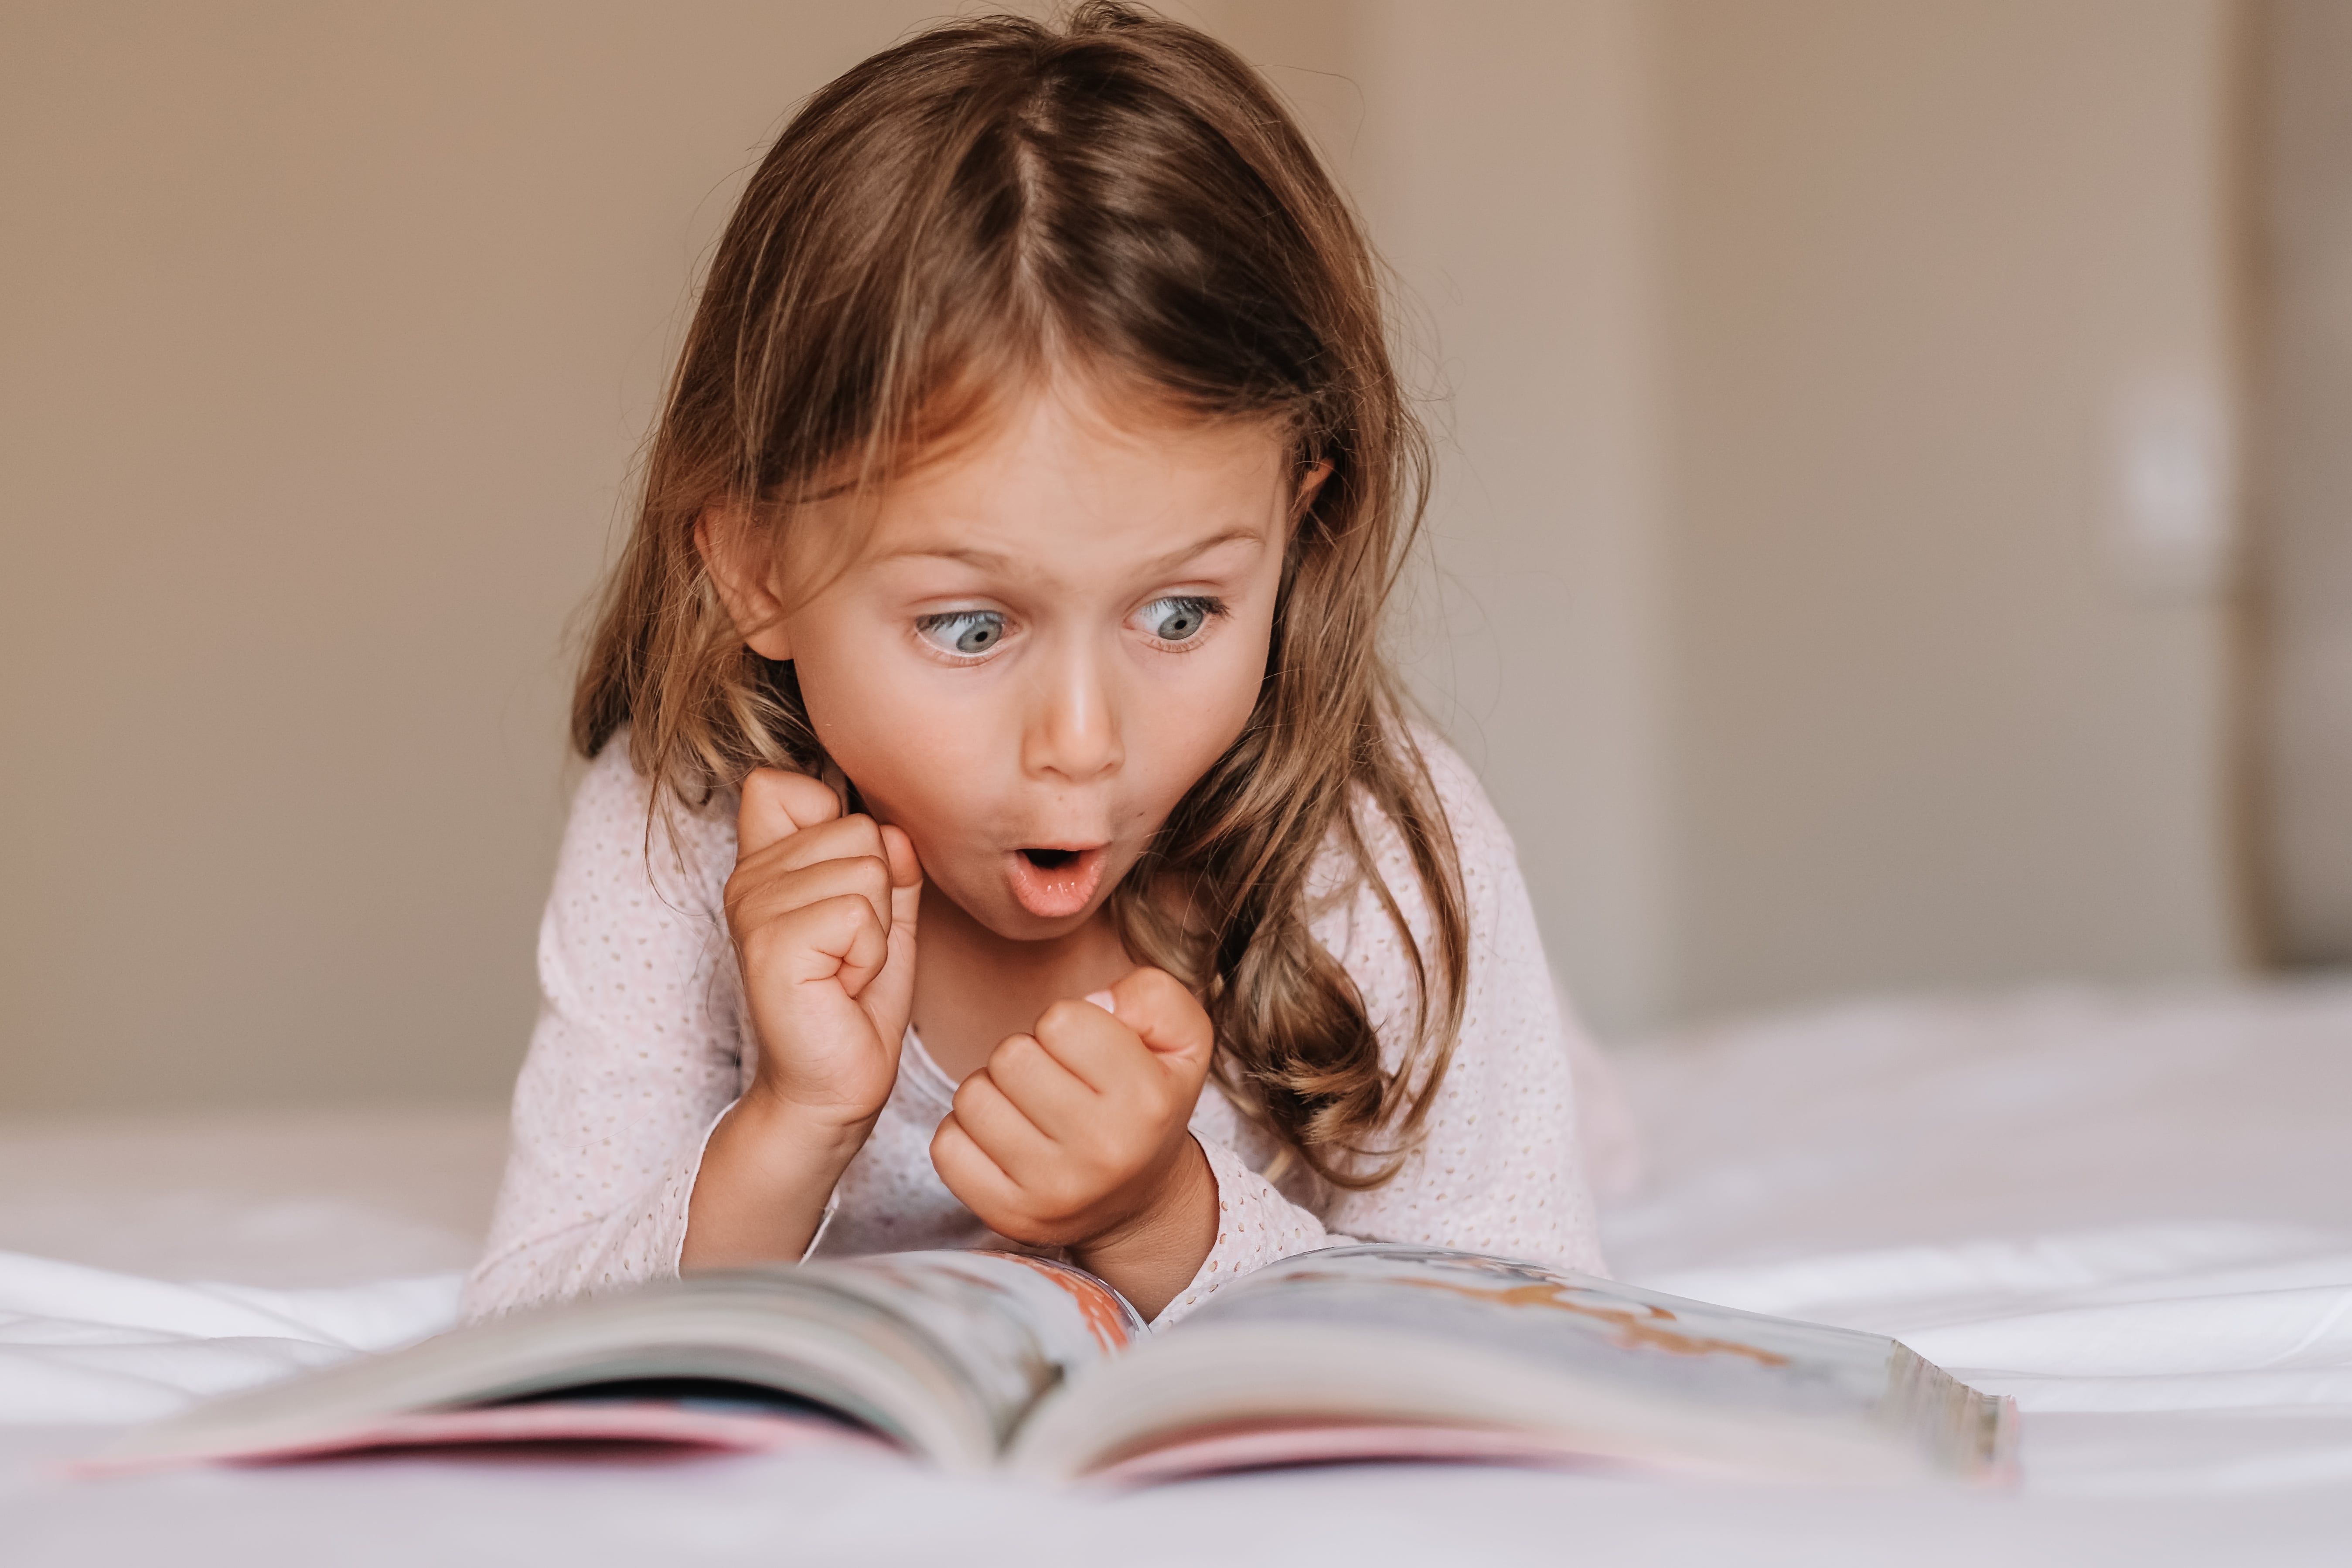 A little girl lying on her tummy in bed reading a picture book. She is completely surprised about what is happening in the story as her face is one of complete shock